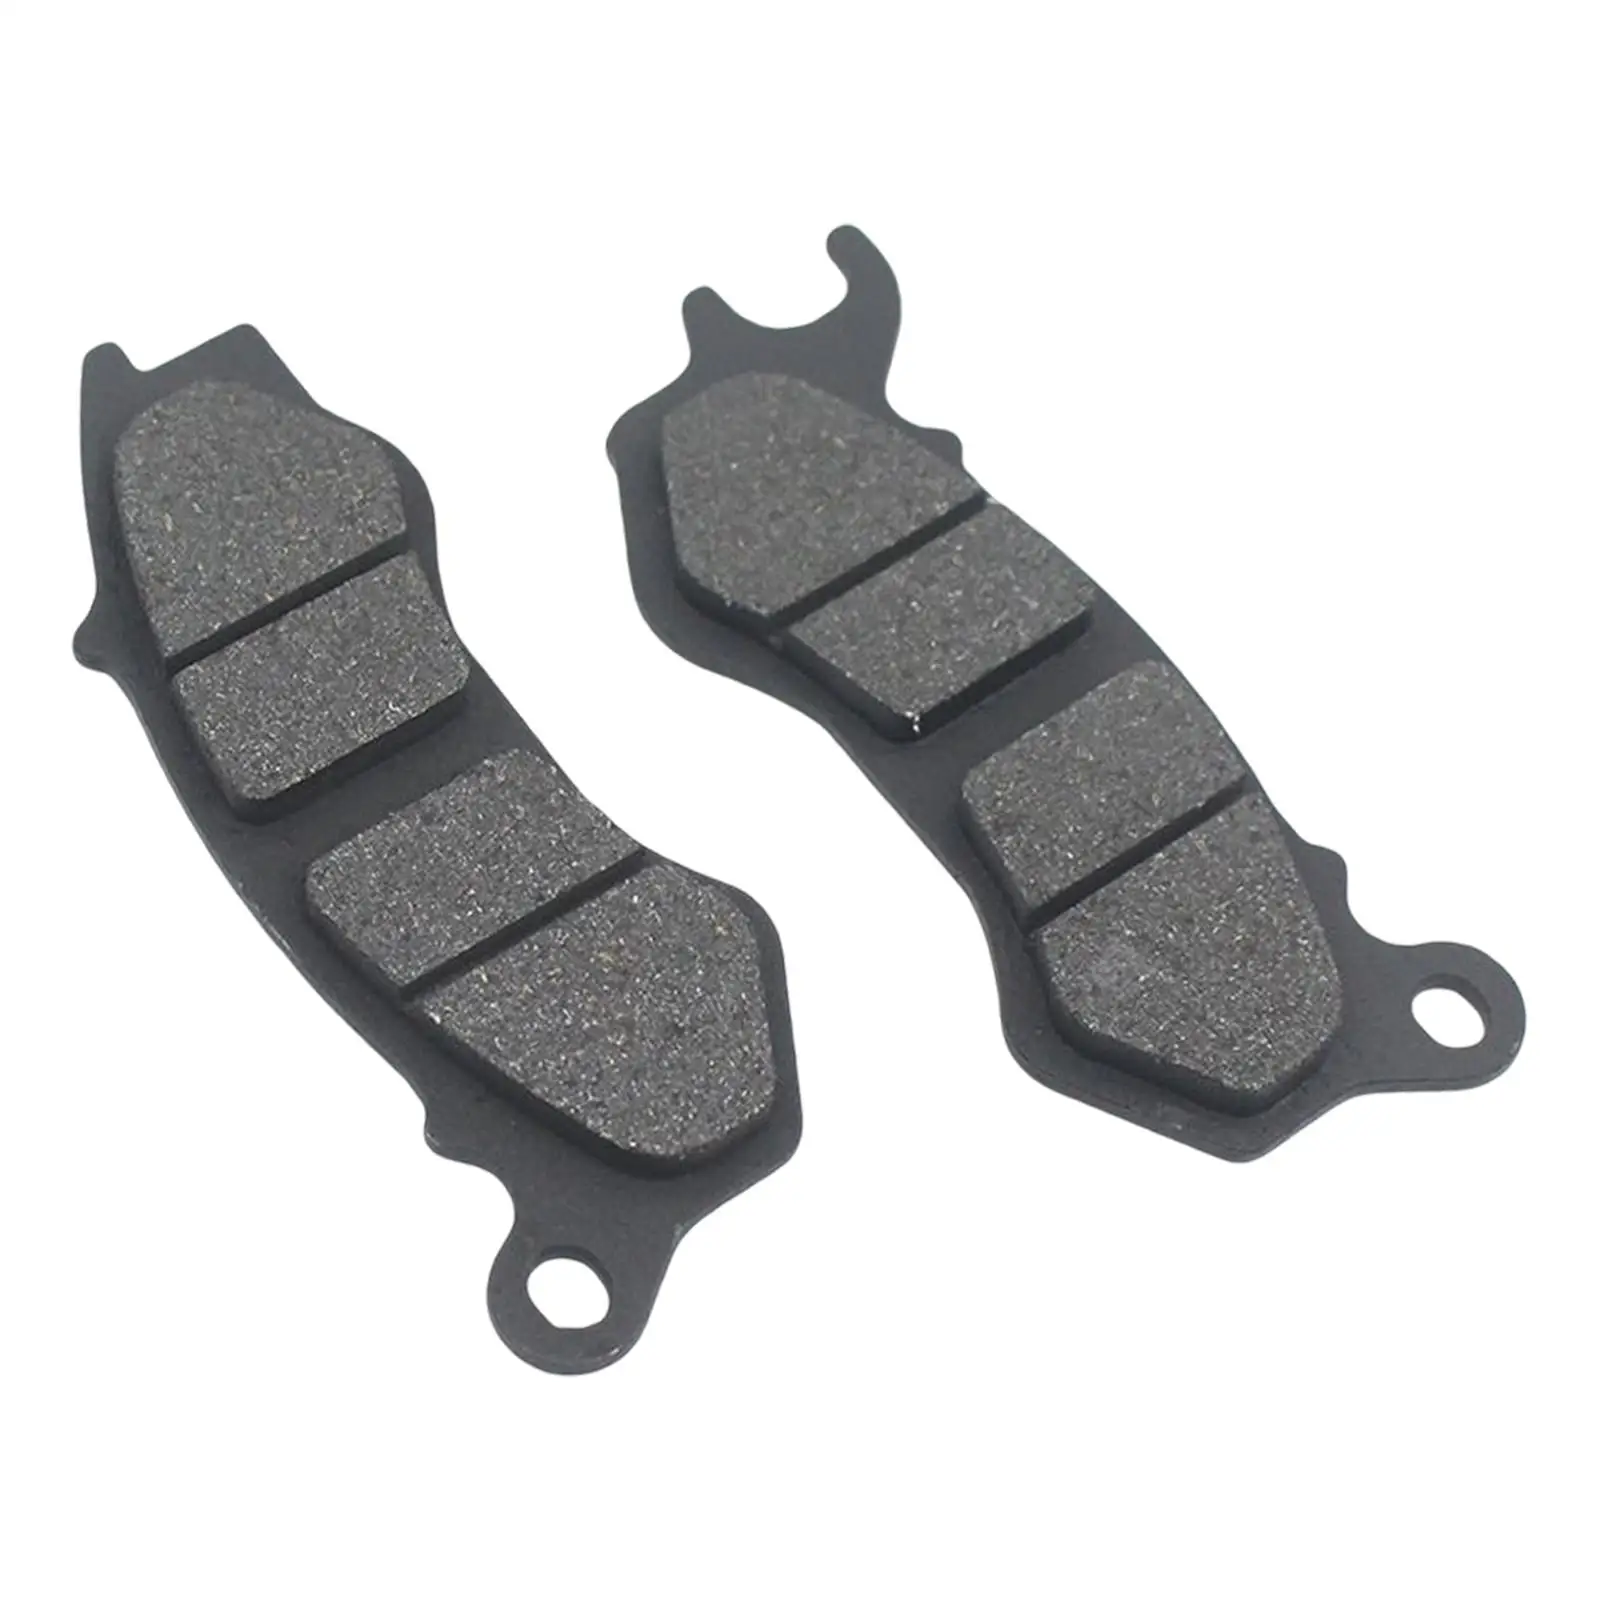 Front Brake Pads for Honda PCX 125 150 - High-Quality Wood Material, Eas... - £16.23 GBP